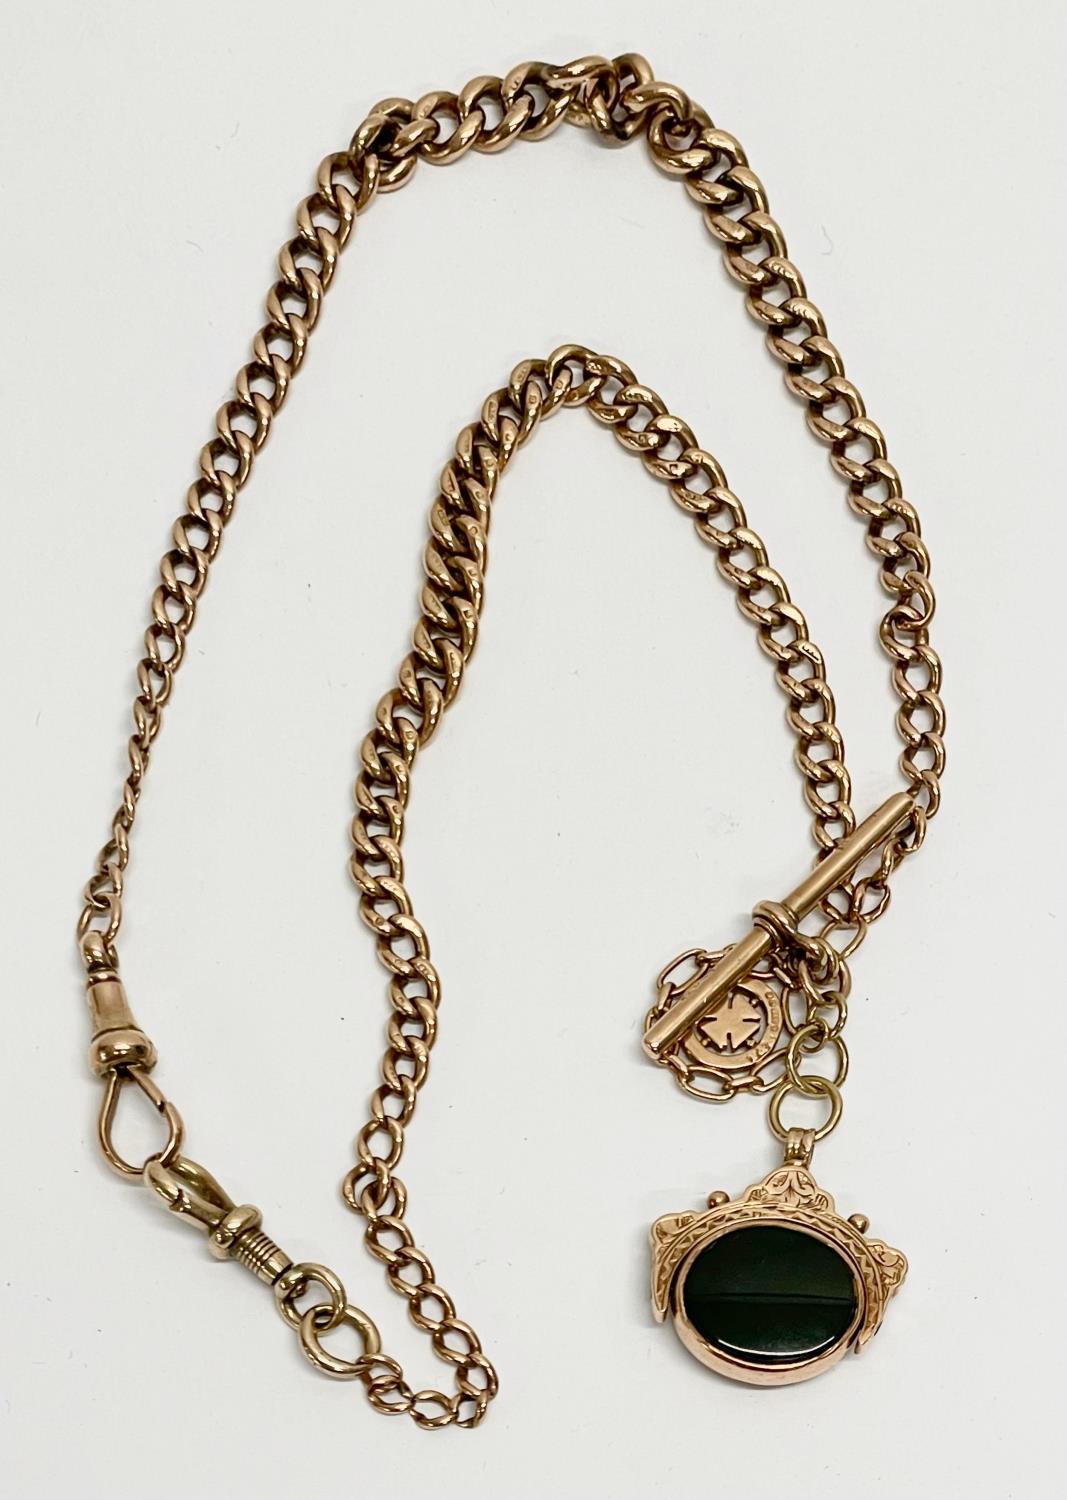 A 9ct gold chain and fob necklace. 33.16 grams